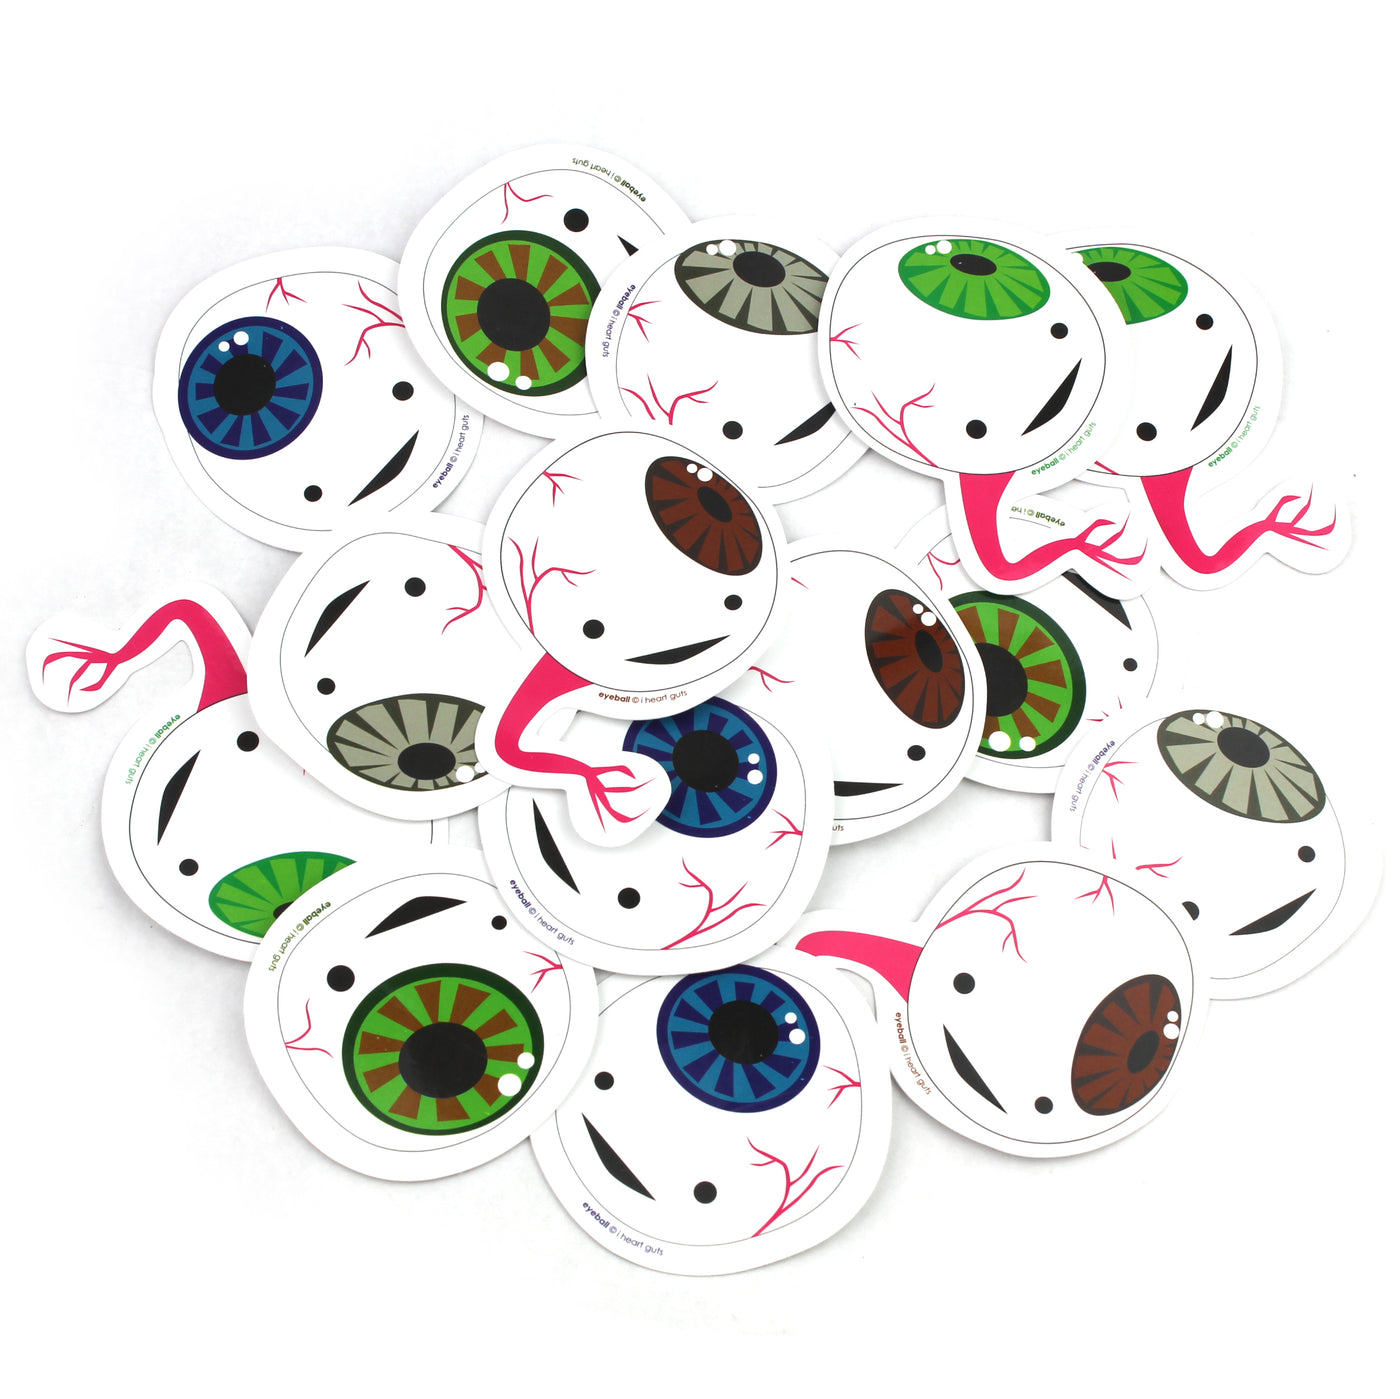 I Heart Guts I Only Have Eyeball Stickers for You - 15 Eyeball Stickers - Vinyl Sticker Pack